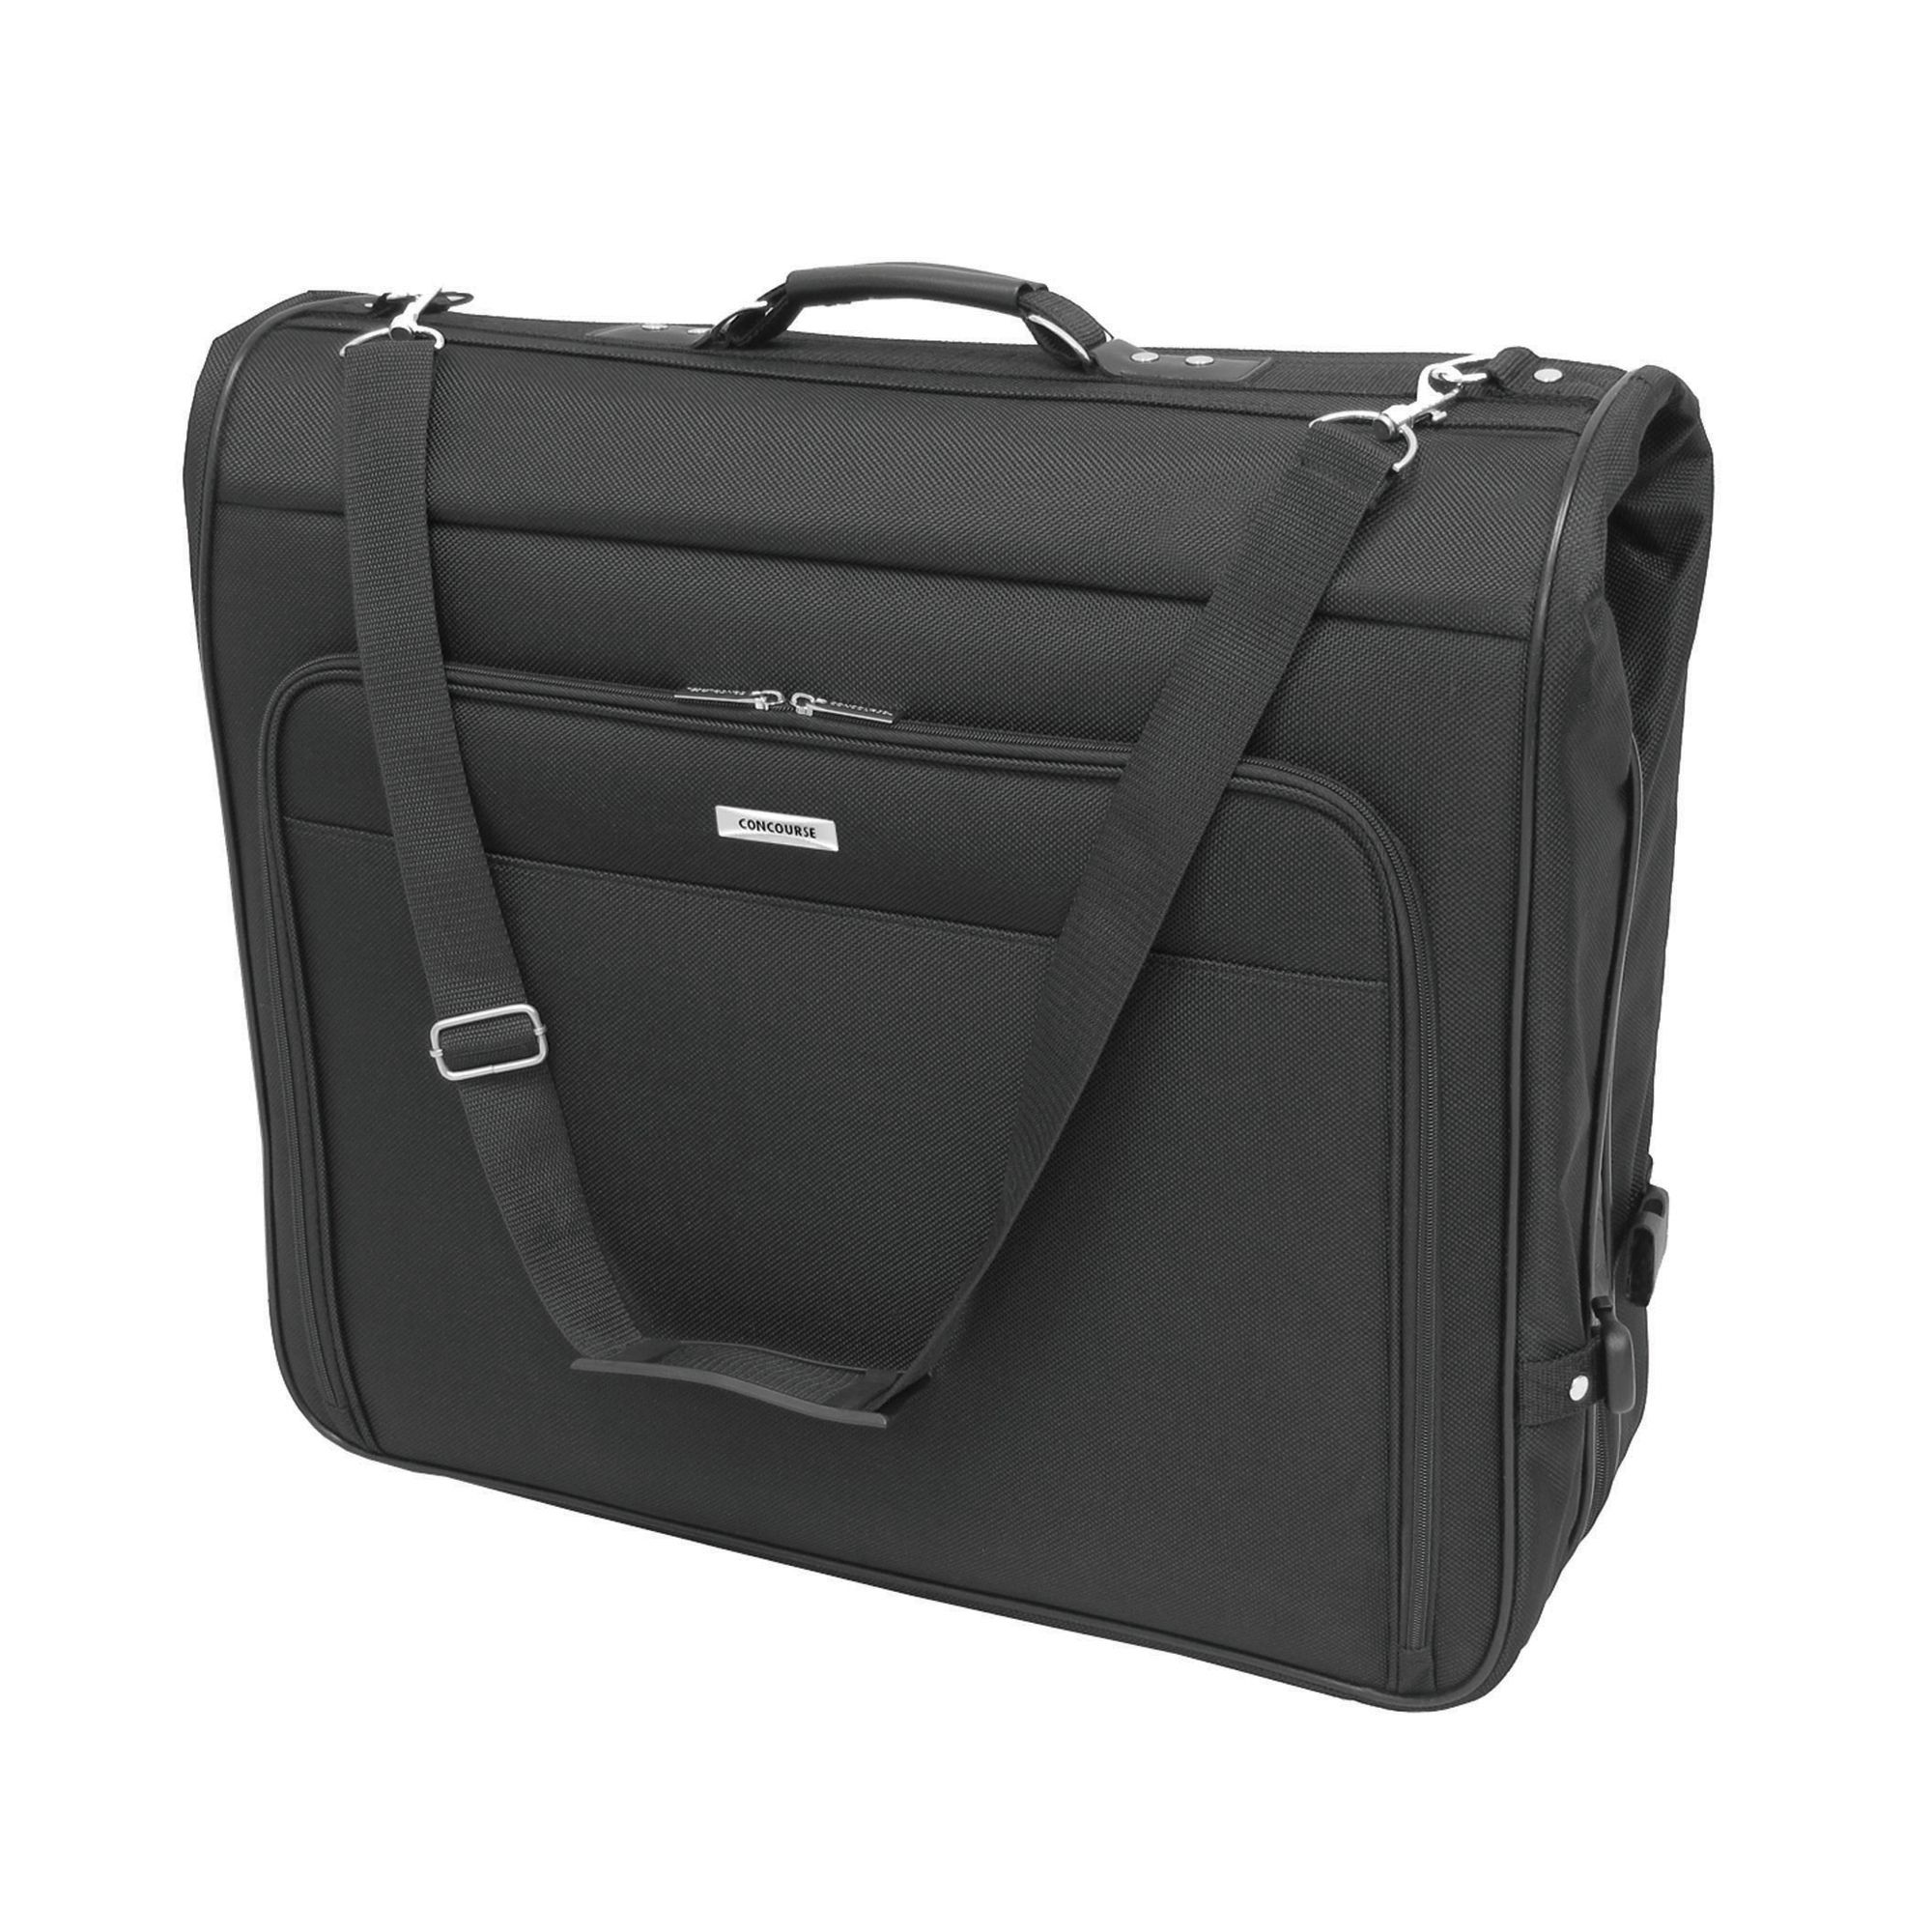 Concourse 46&quot; Hanging Garment Bag - Home - Luggage & Bags - Luggage & Suitcases - Garment Bags